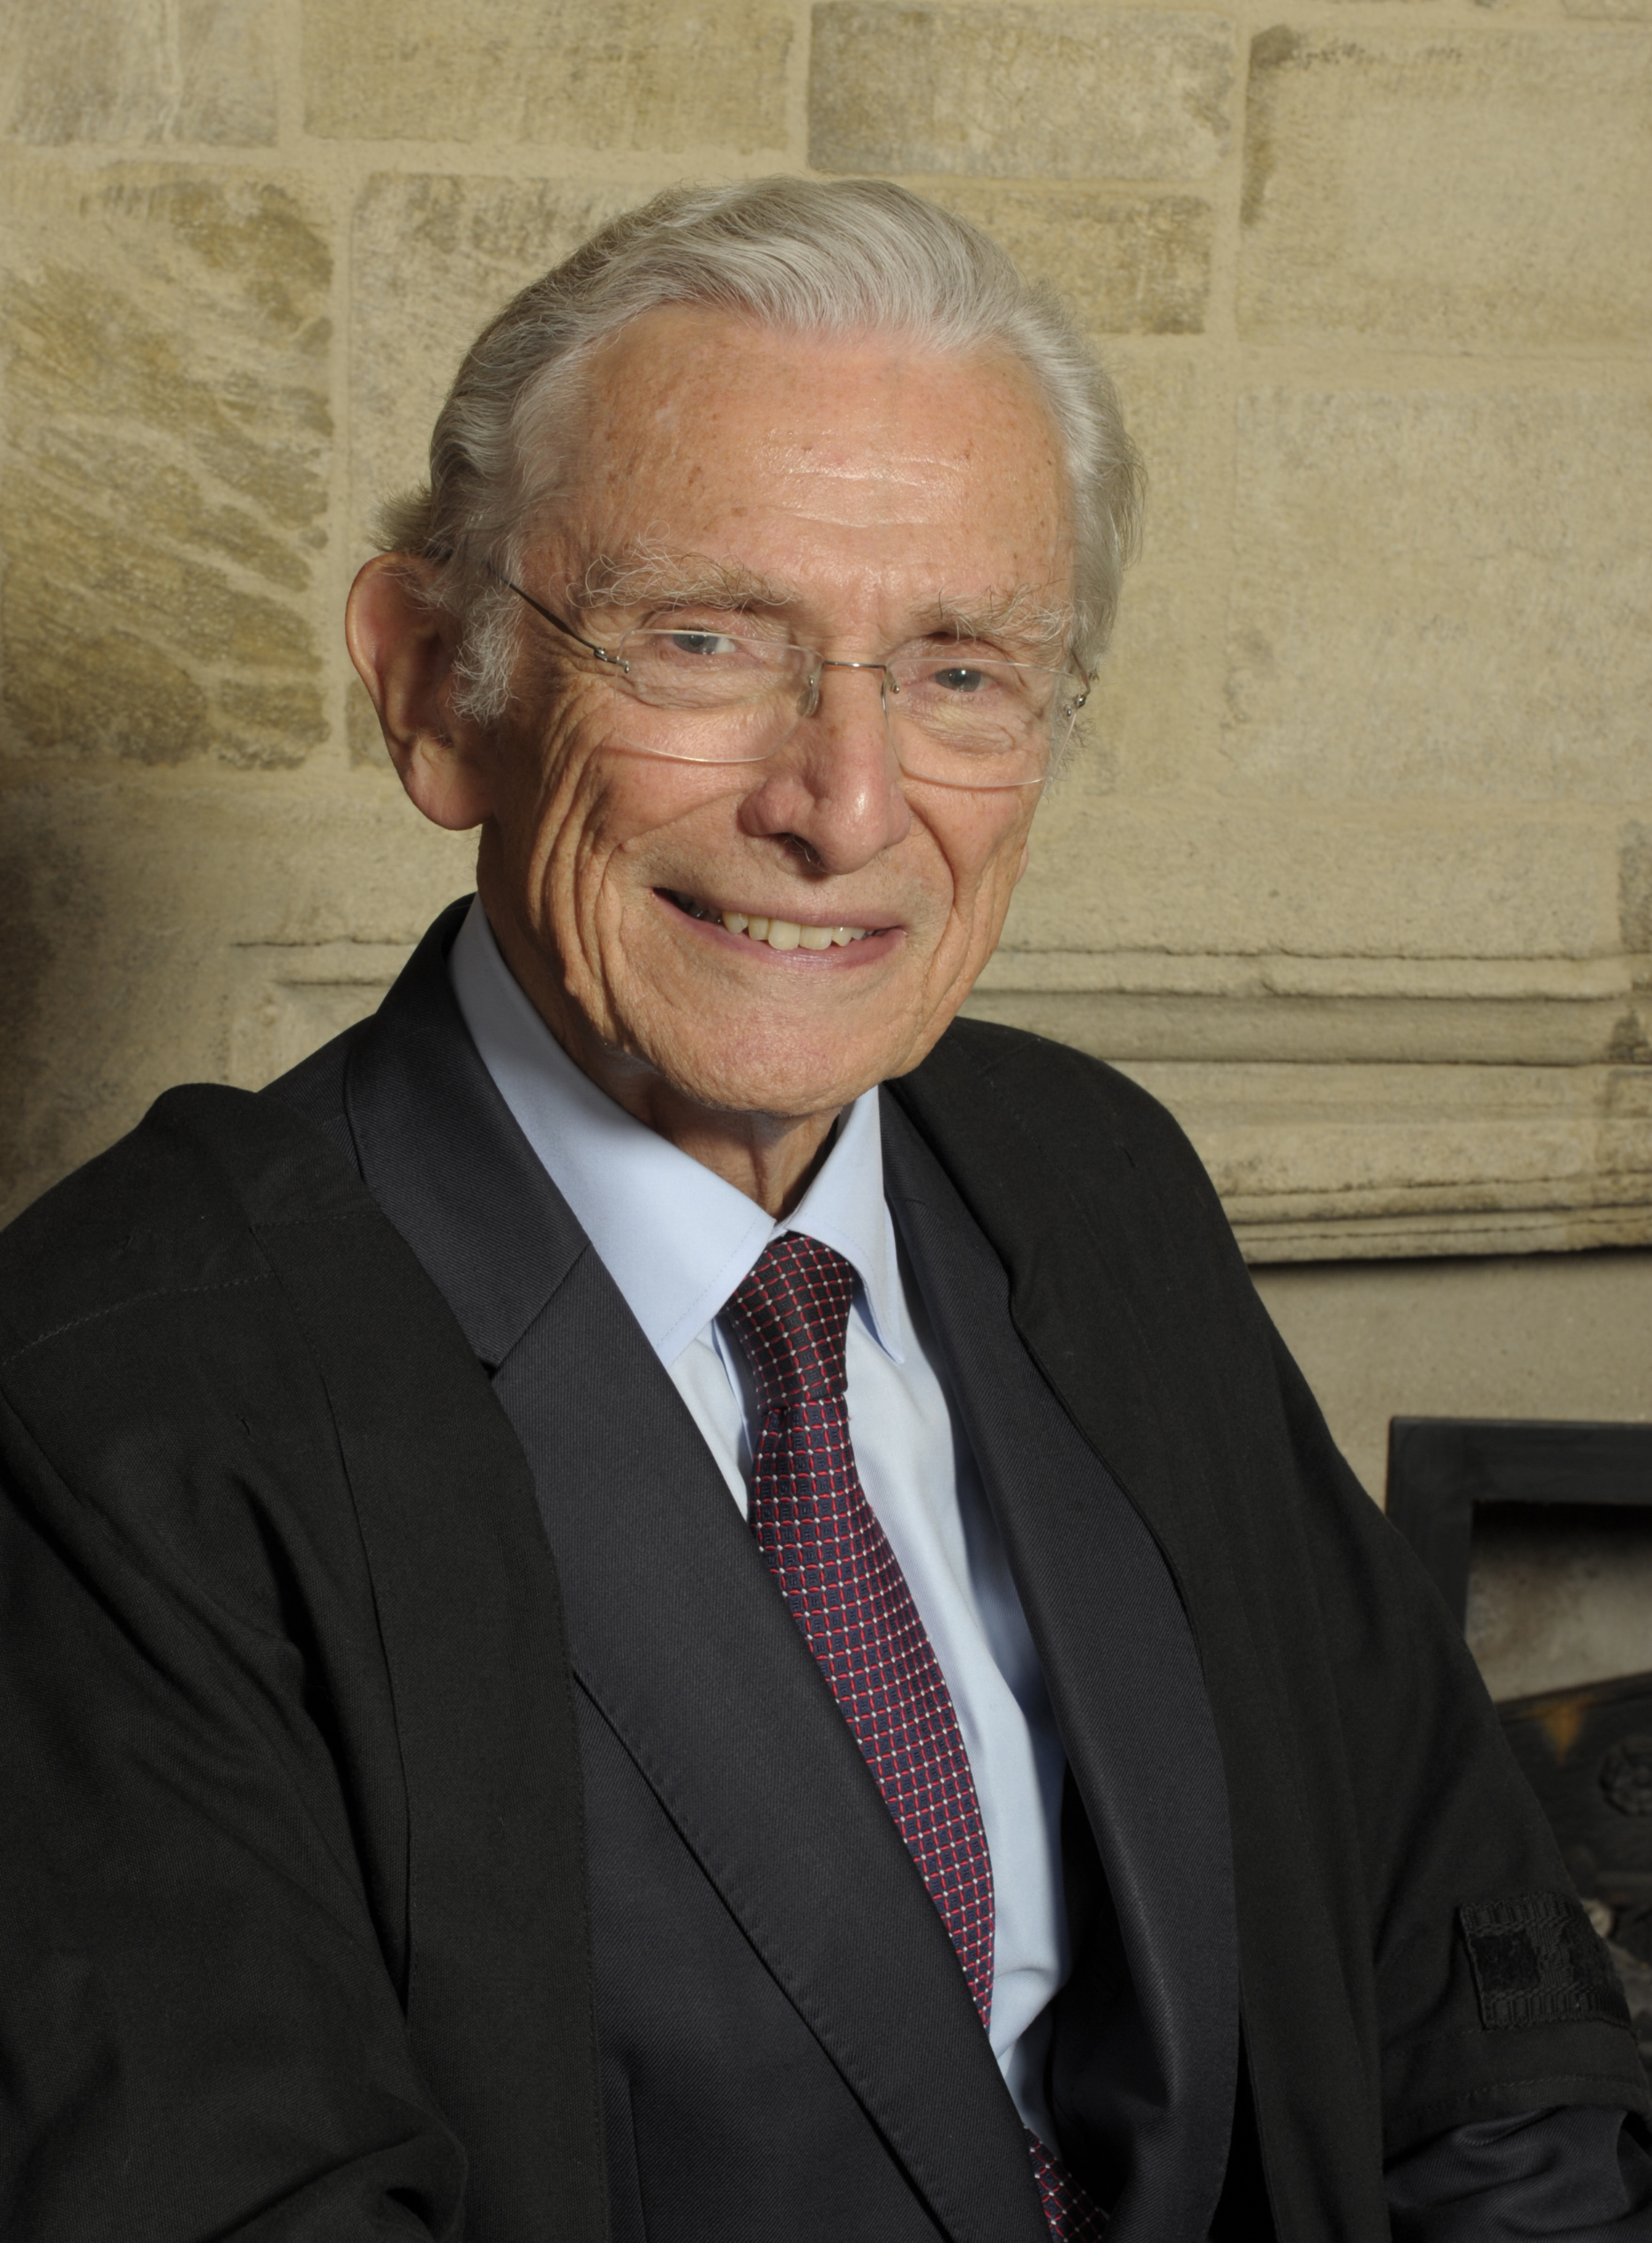 The Rt Hon Lord Norman Fowler